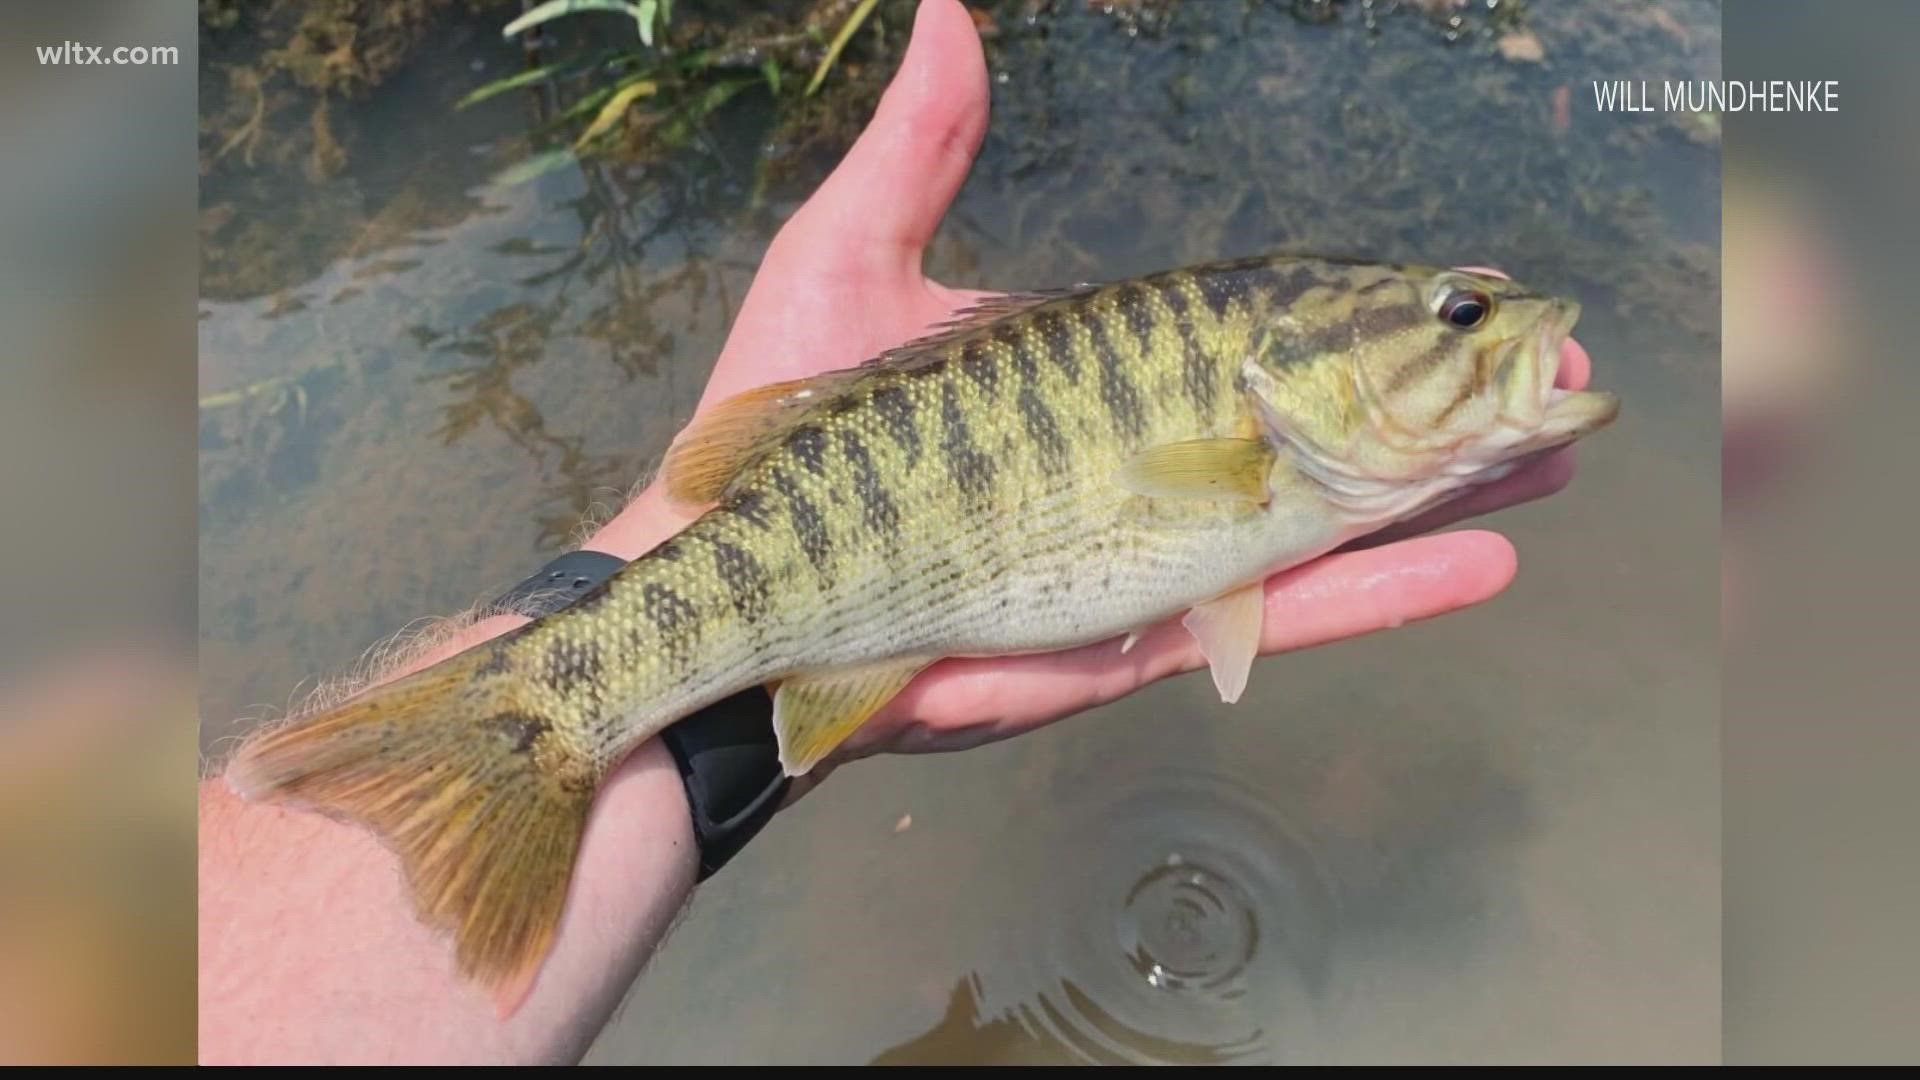 A fish that's in need of conservation....so they don't suffer from hybridization from spotted bass and go extinct